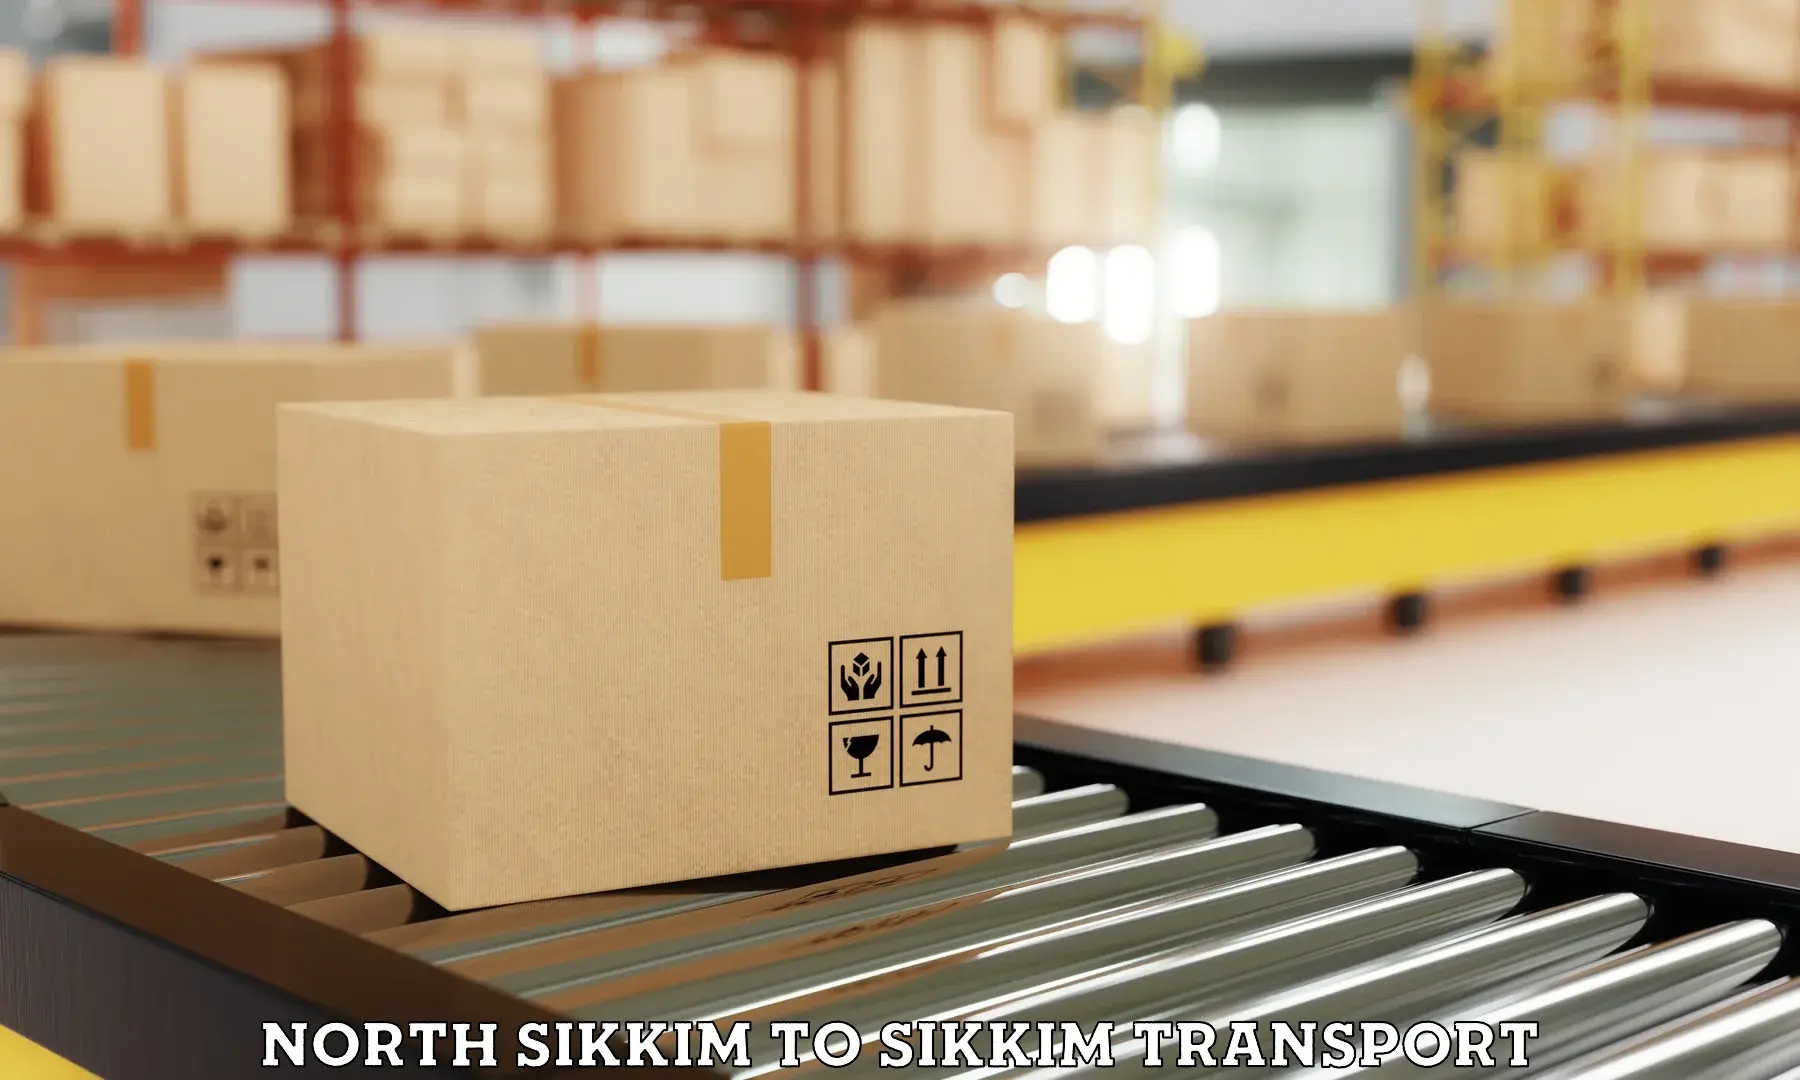 Shipping partner North Sikkim to South Sikkim